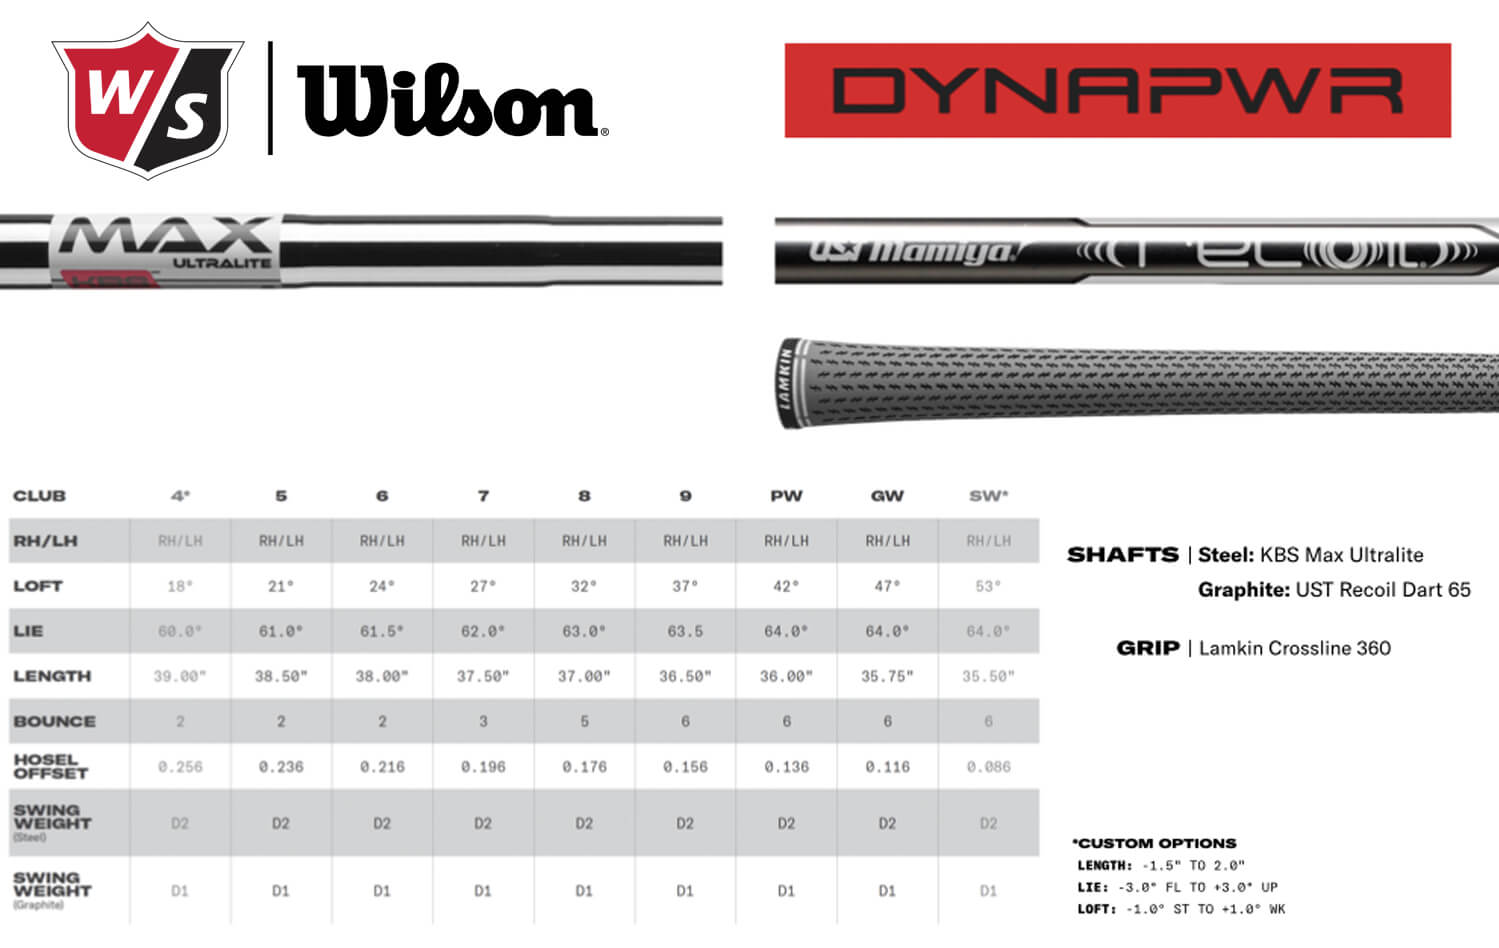 Specification for Wilson Staff Dynapower Golf Irons - Graphite